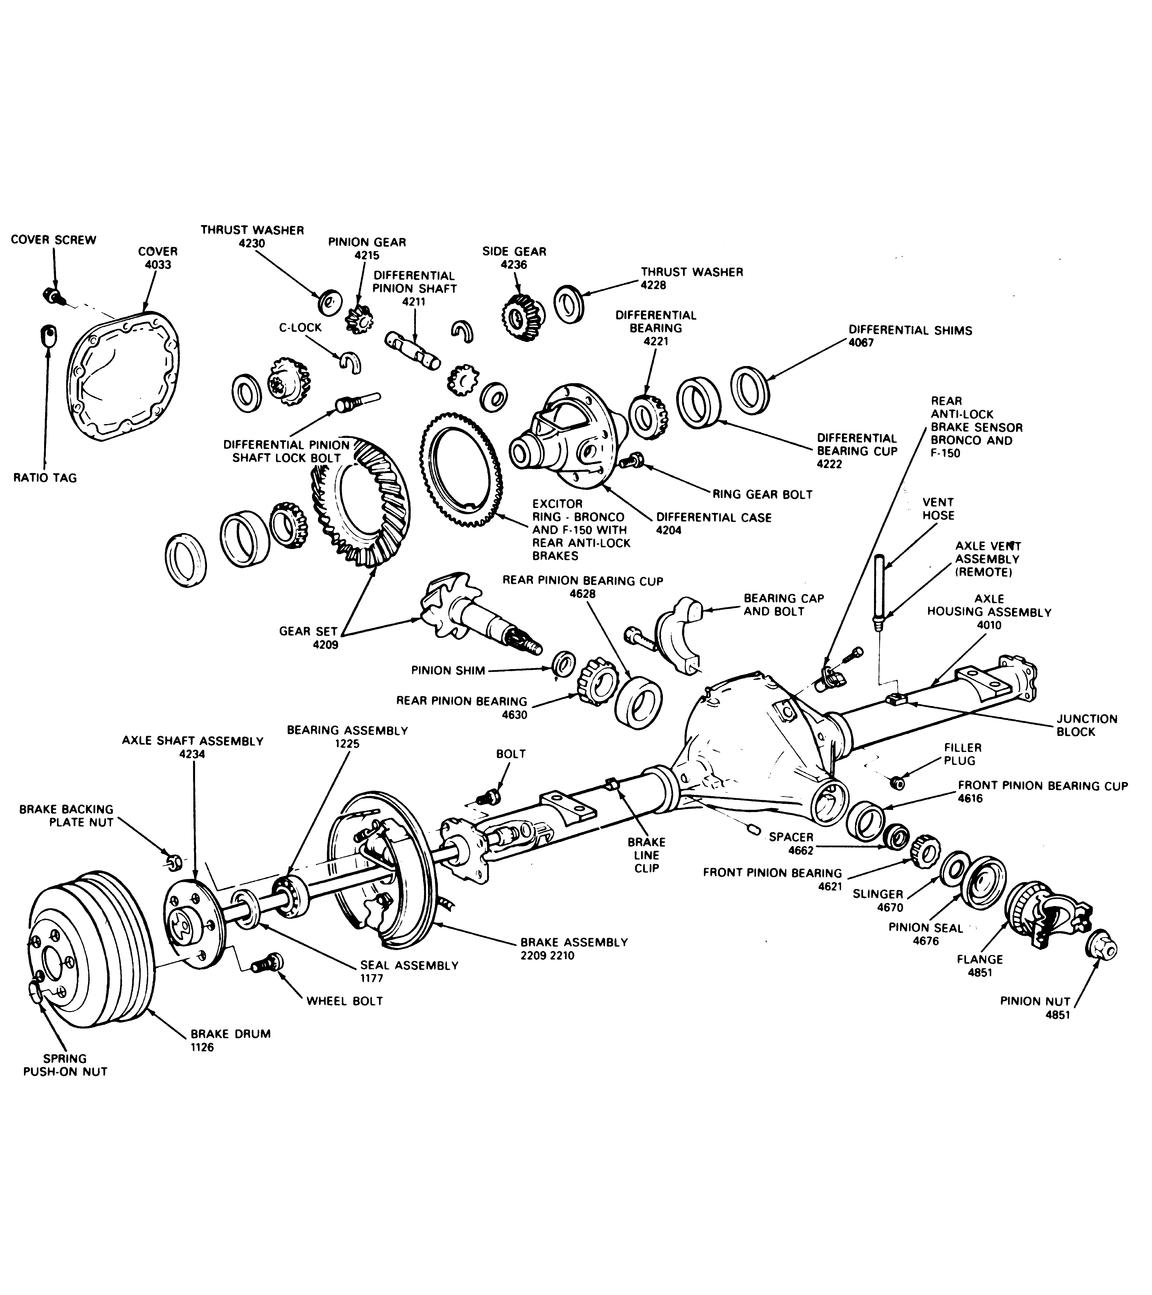 Ford ranger axle codes 97